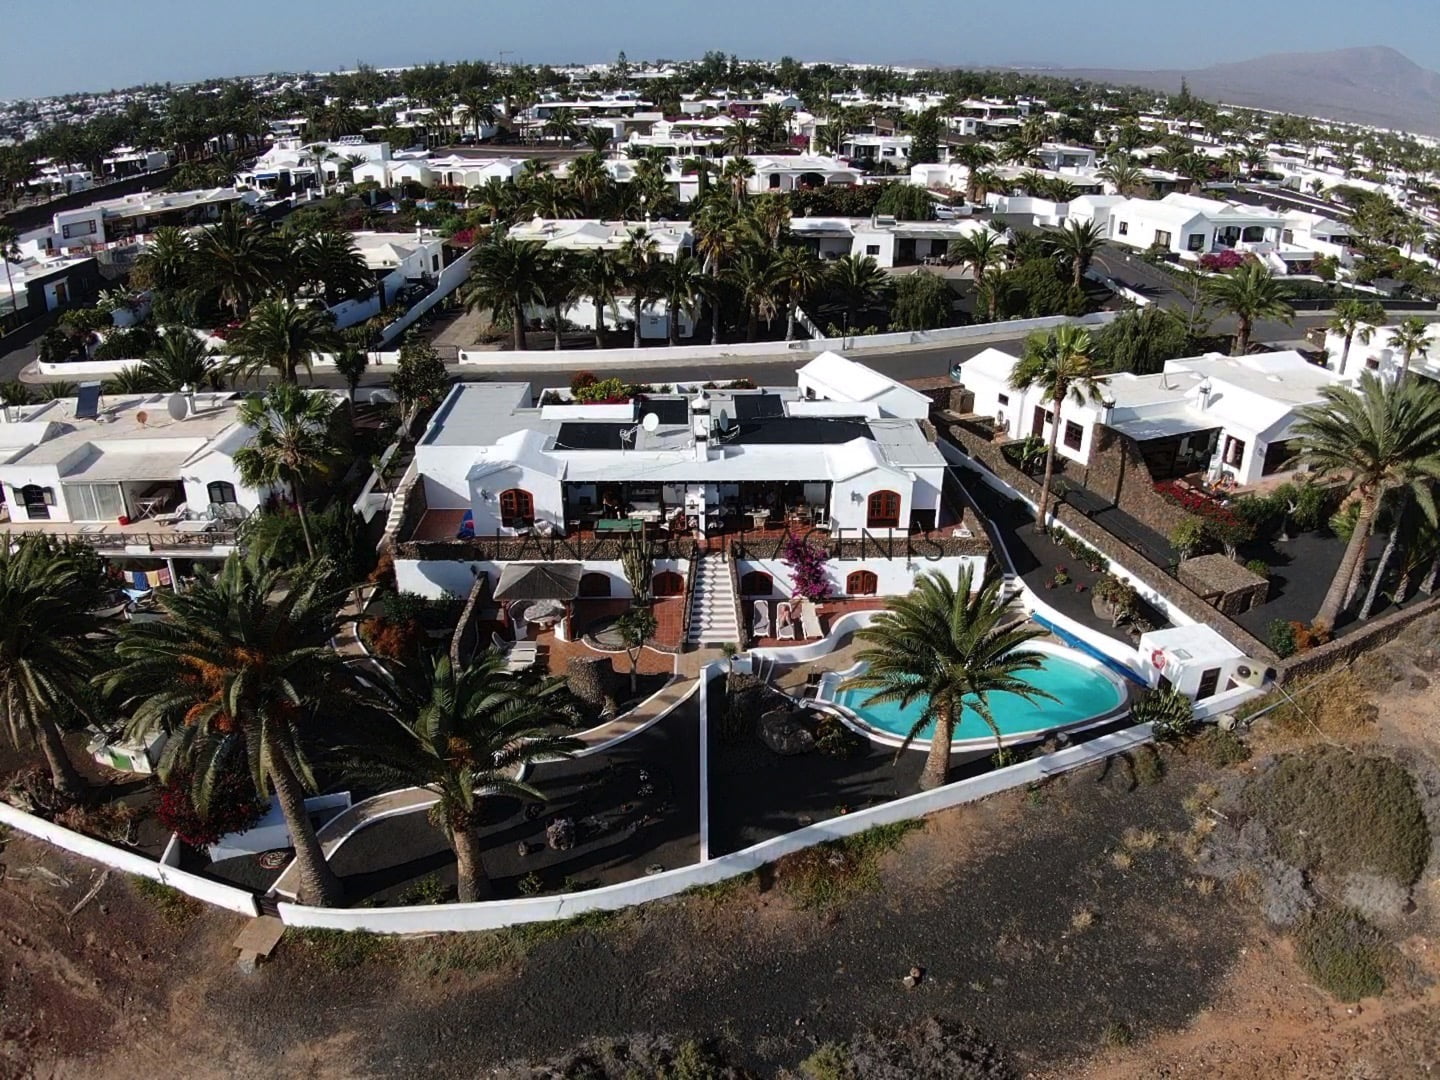 Big Detached Villa for sale Divided into Two Semi-Detached Villas With Great Sea Views and Potential Near Playa Blanca Town with Future Bookings, at only 2 min to the Beach